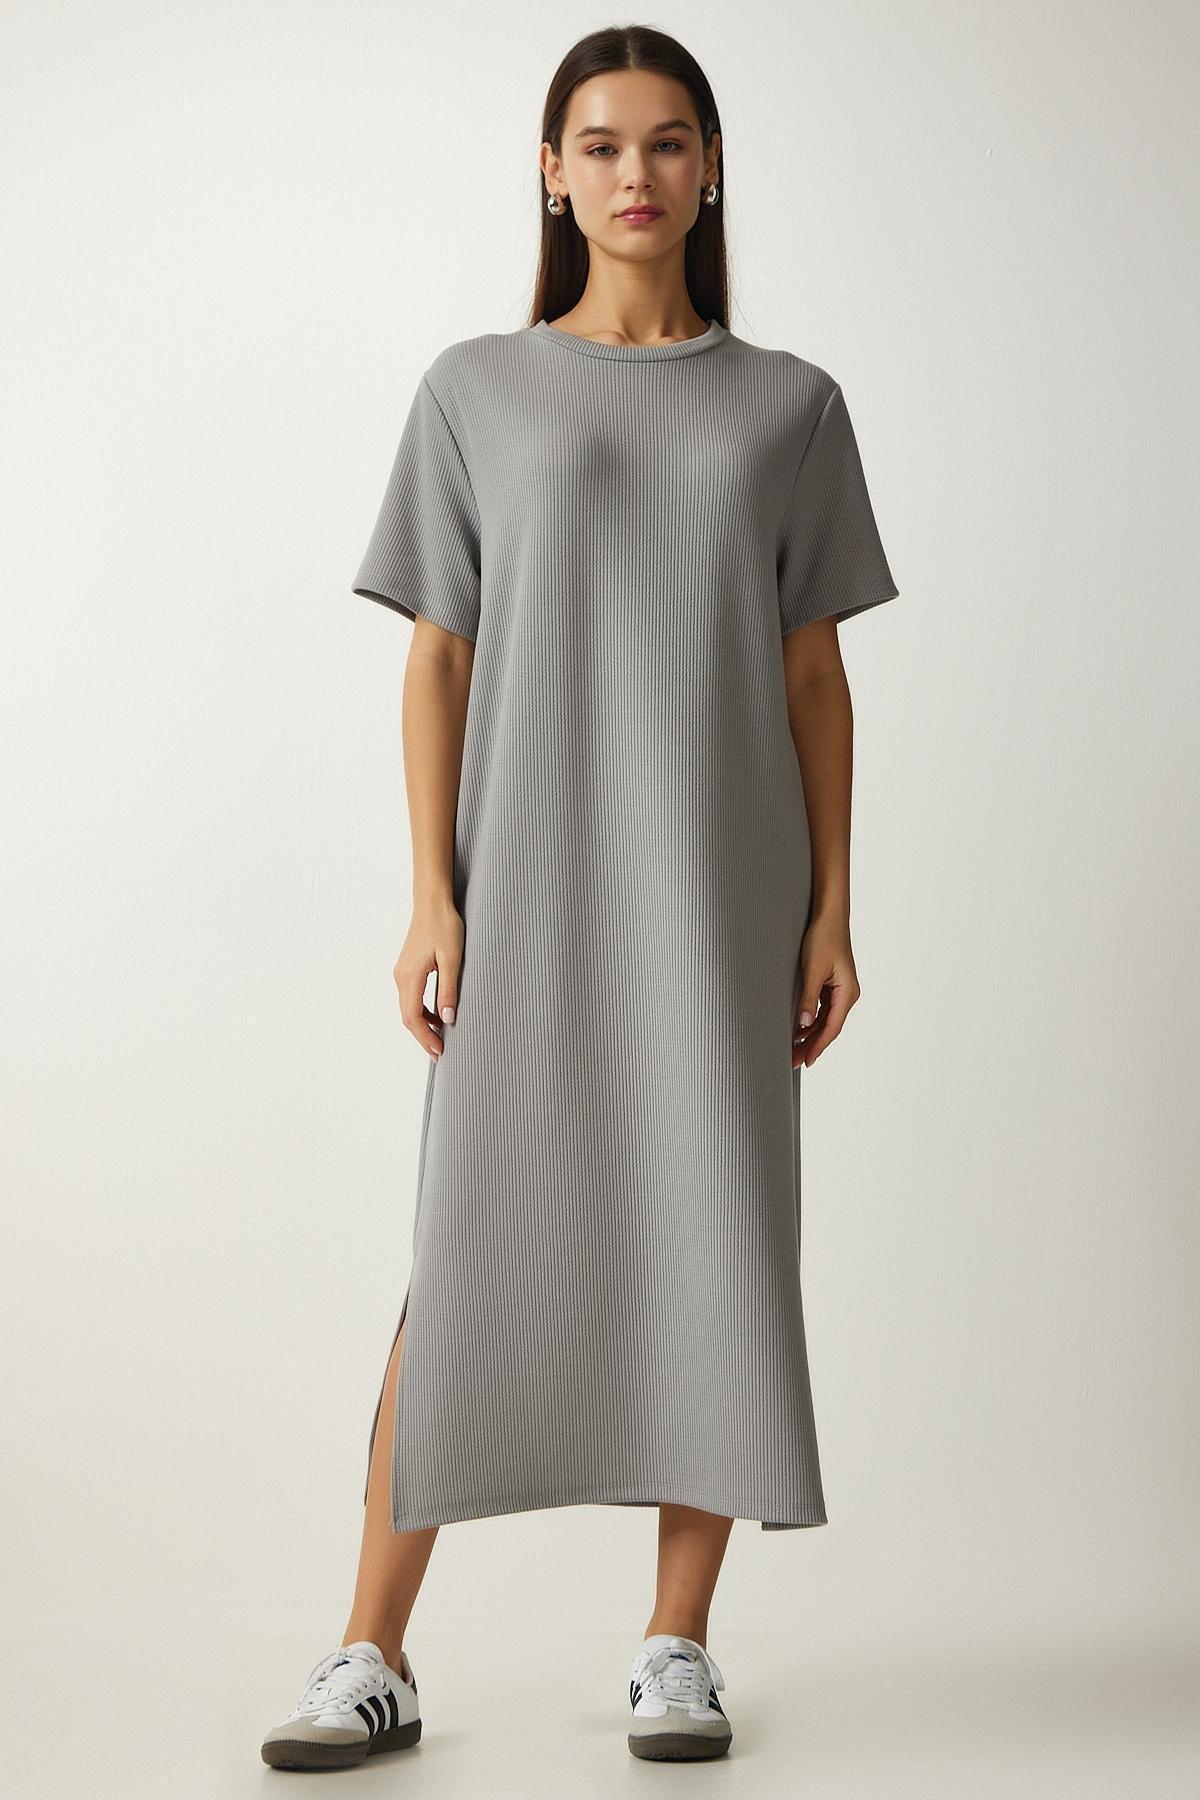 Happiness Istanbul - Grey Crew Neck Knitted Ribbed Dress